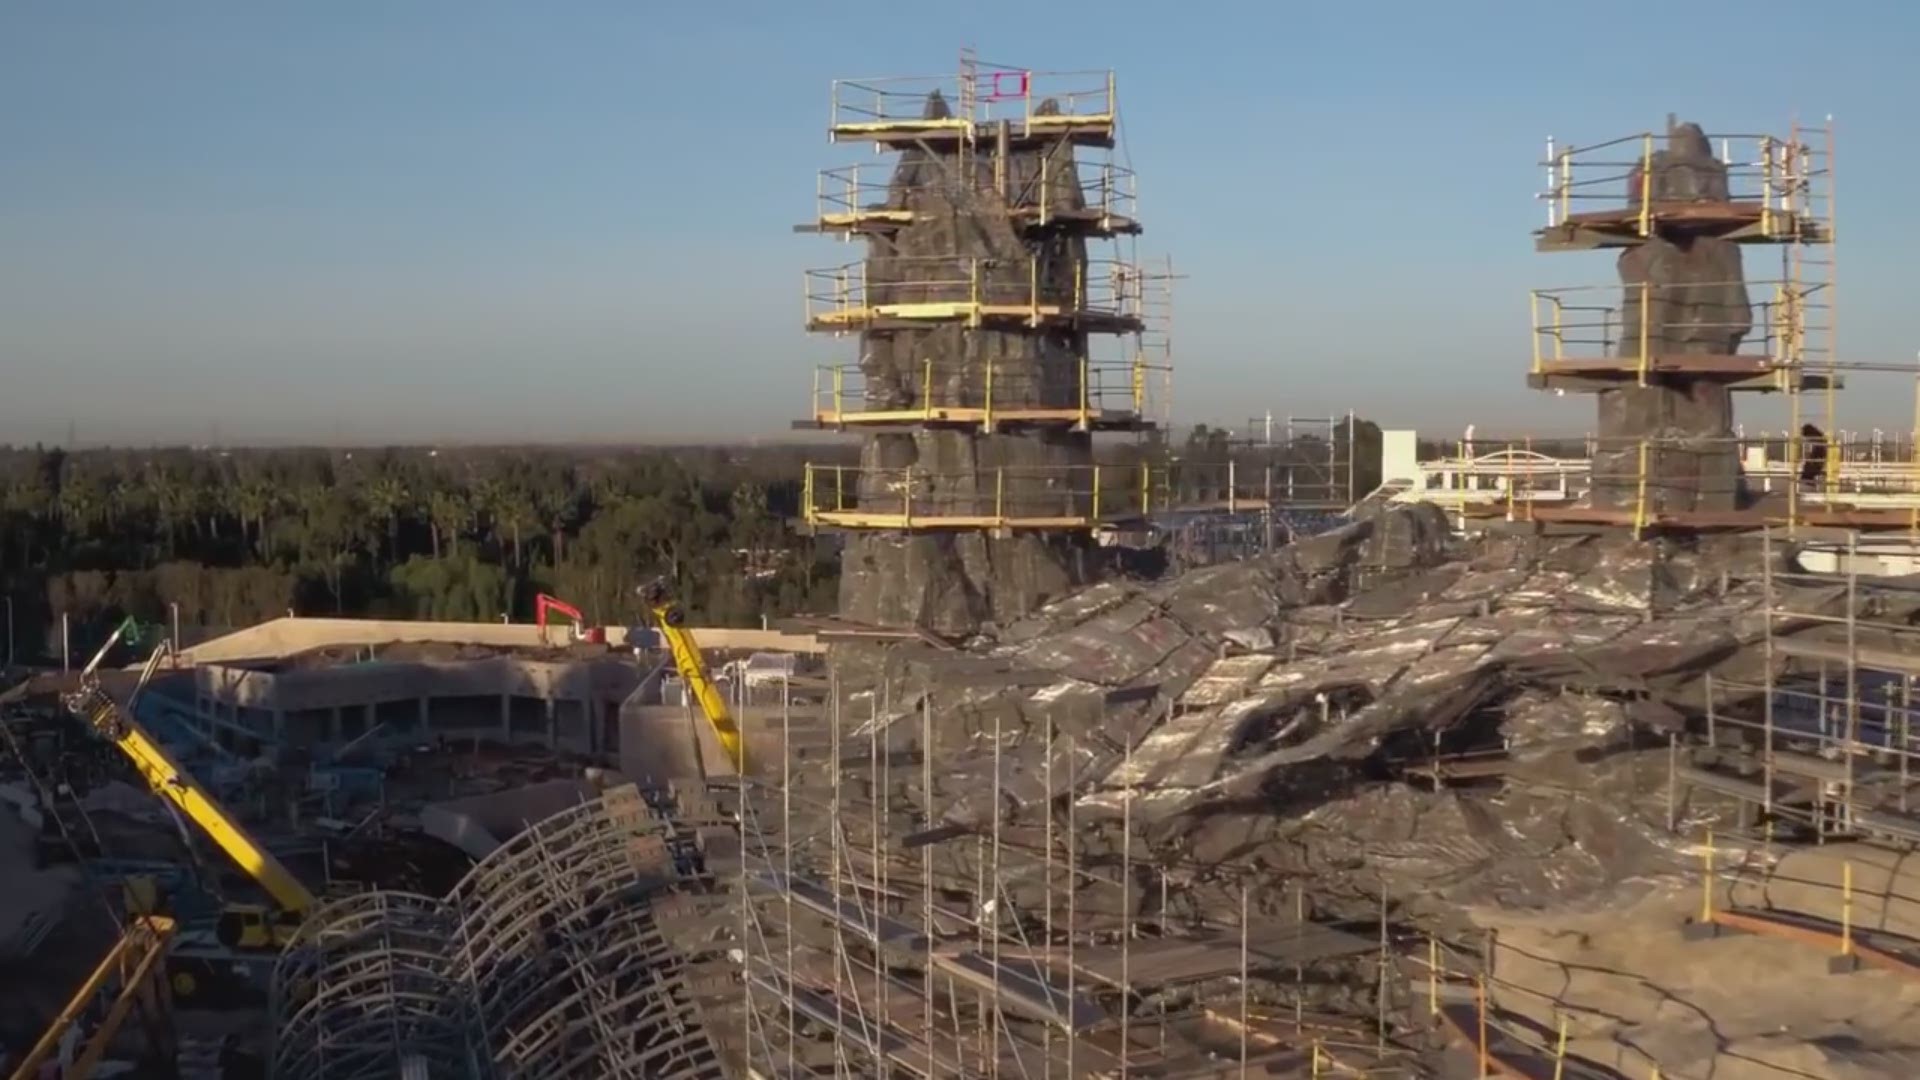 Disney released aerial flyover footage of the new construction site of Star Wars land at Disneyland in Anaheim, California. Star Wars and Disney fans will want to see this. The park is expected to open in 2019. Disney video. ' Courtesy: Disney